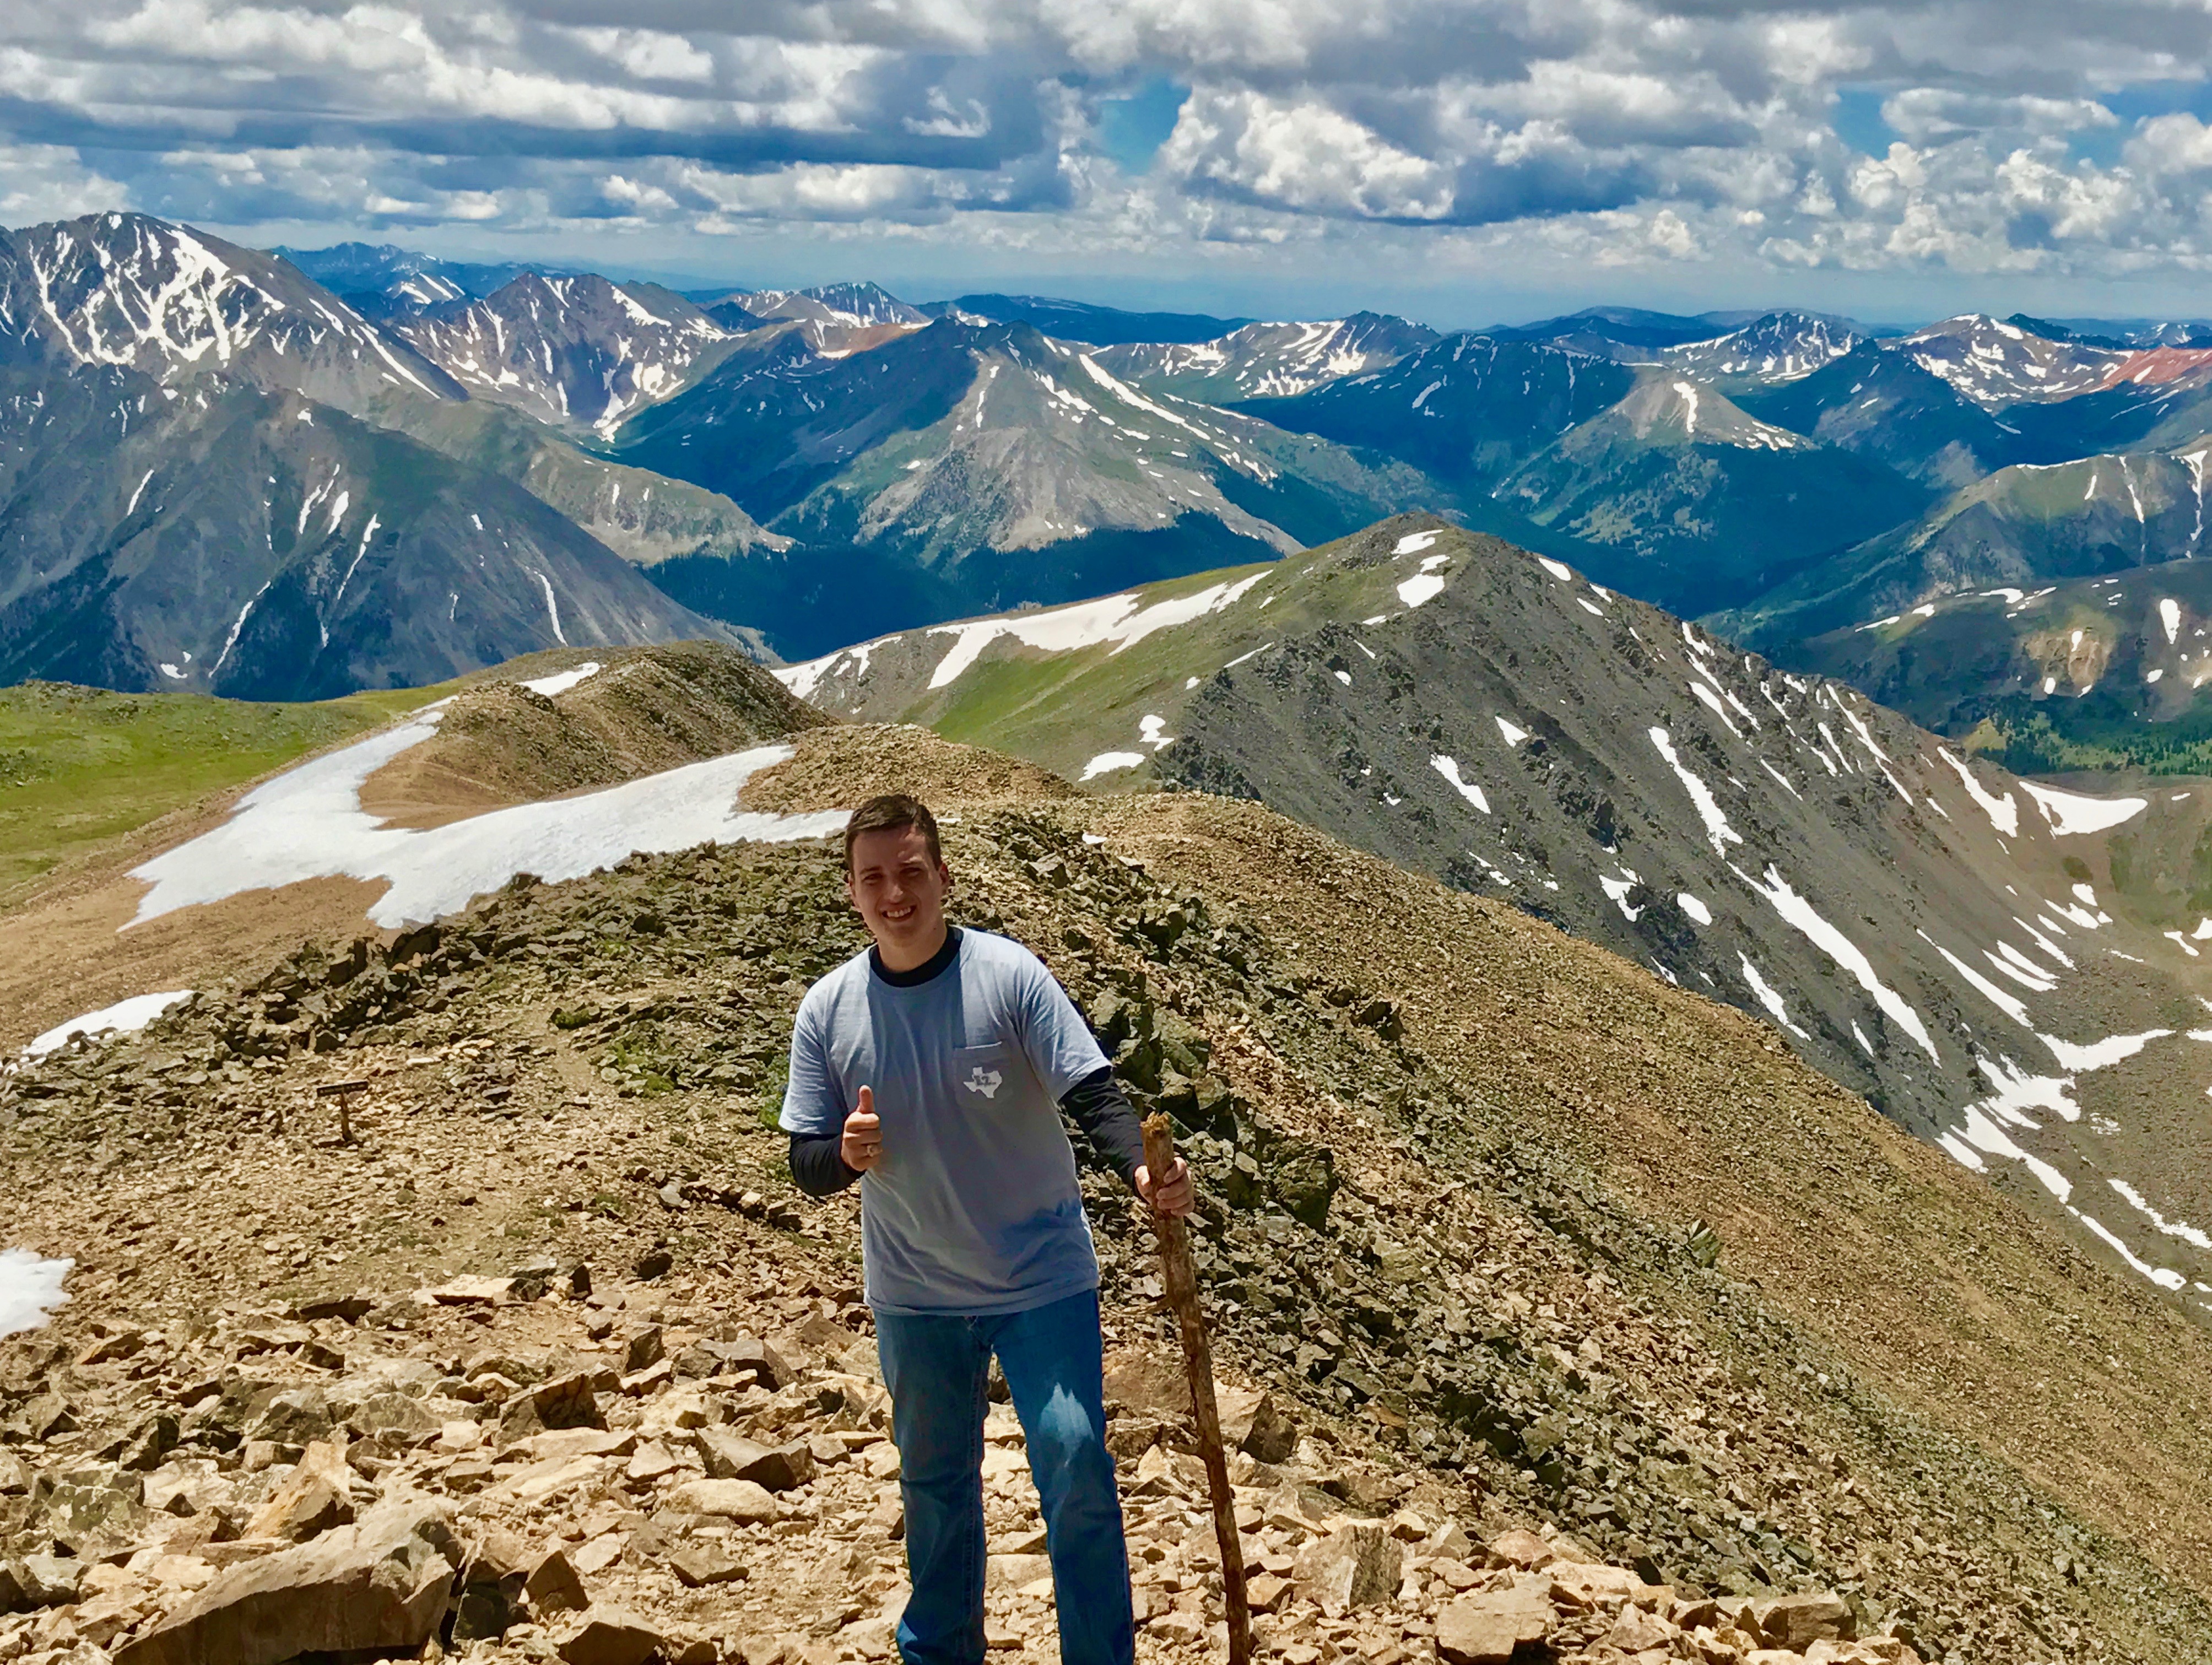 Young male student standing on top of mountain holding a walking stick and giving thumbs up. Behind him is a mountain range. A little bit of snow can be seen, but the terrain is mostly grass, brown dirt and rocky.